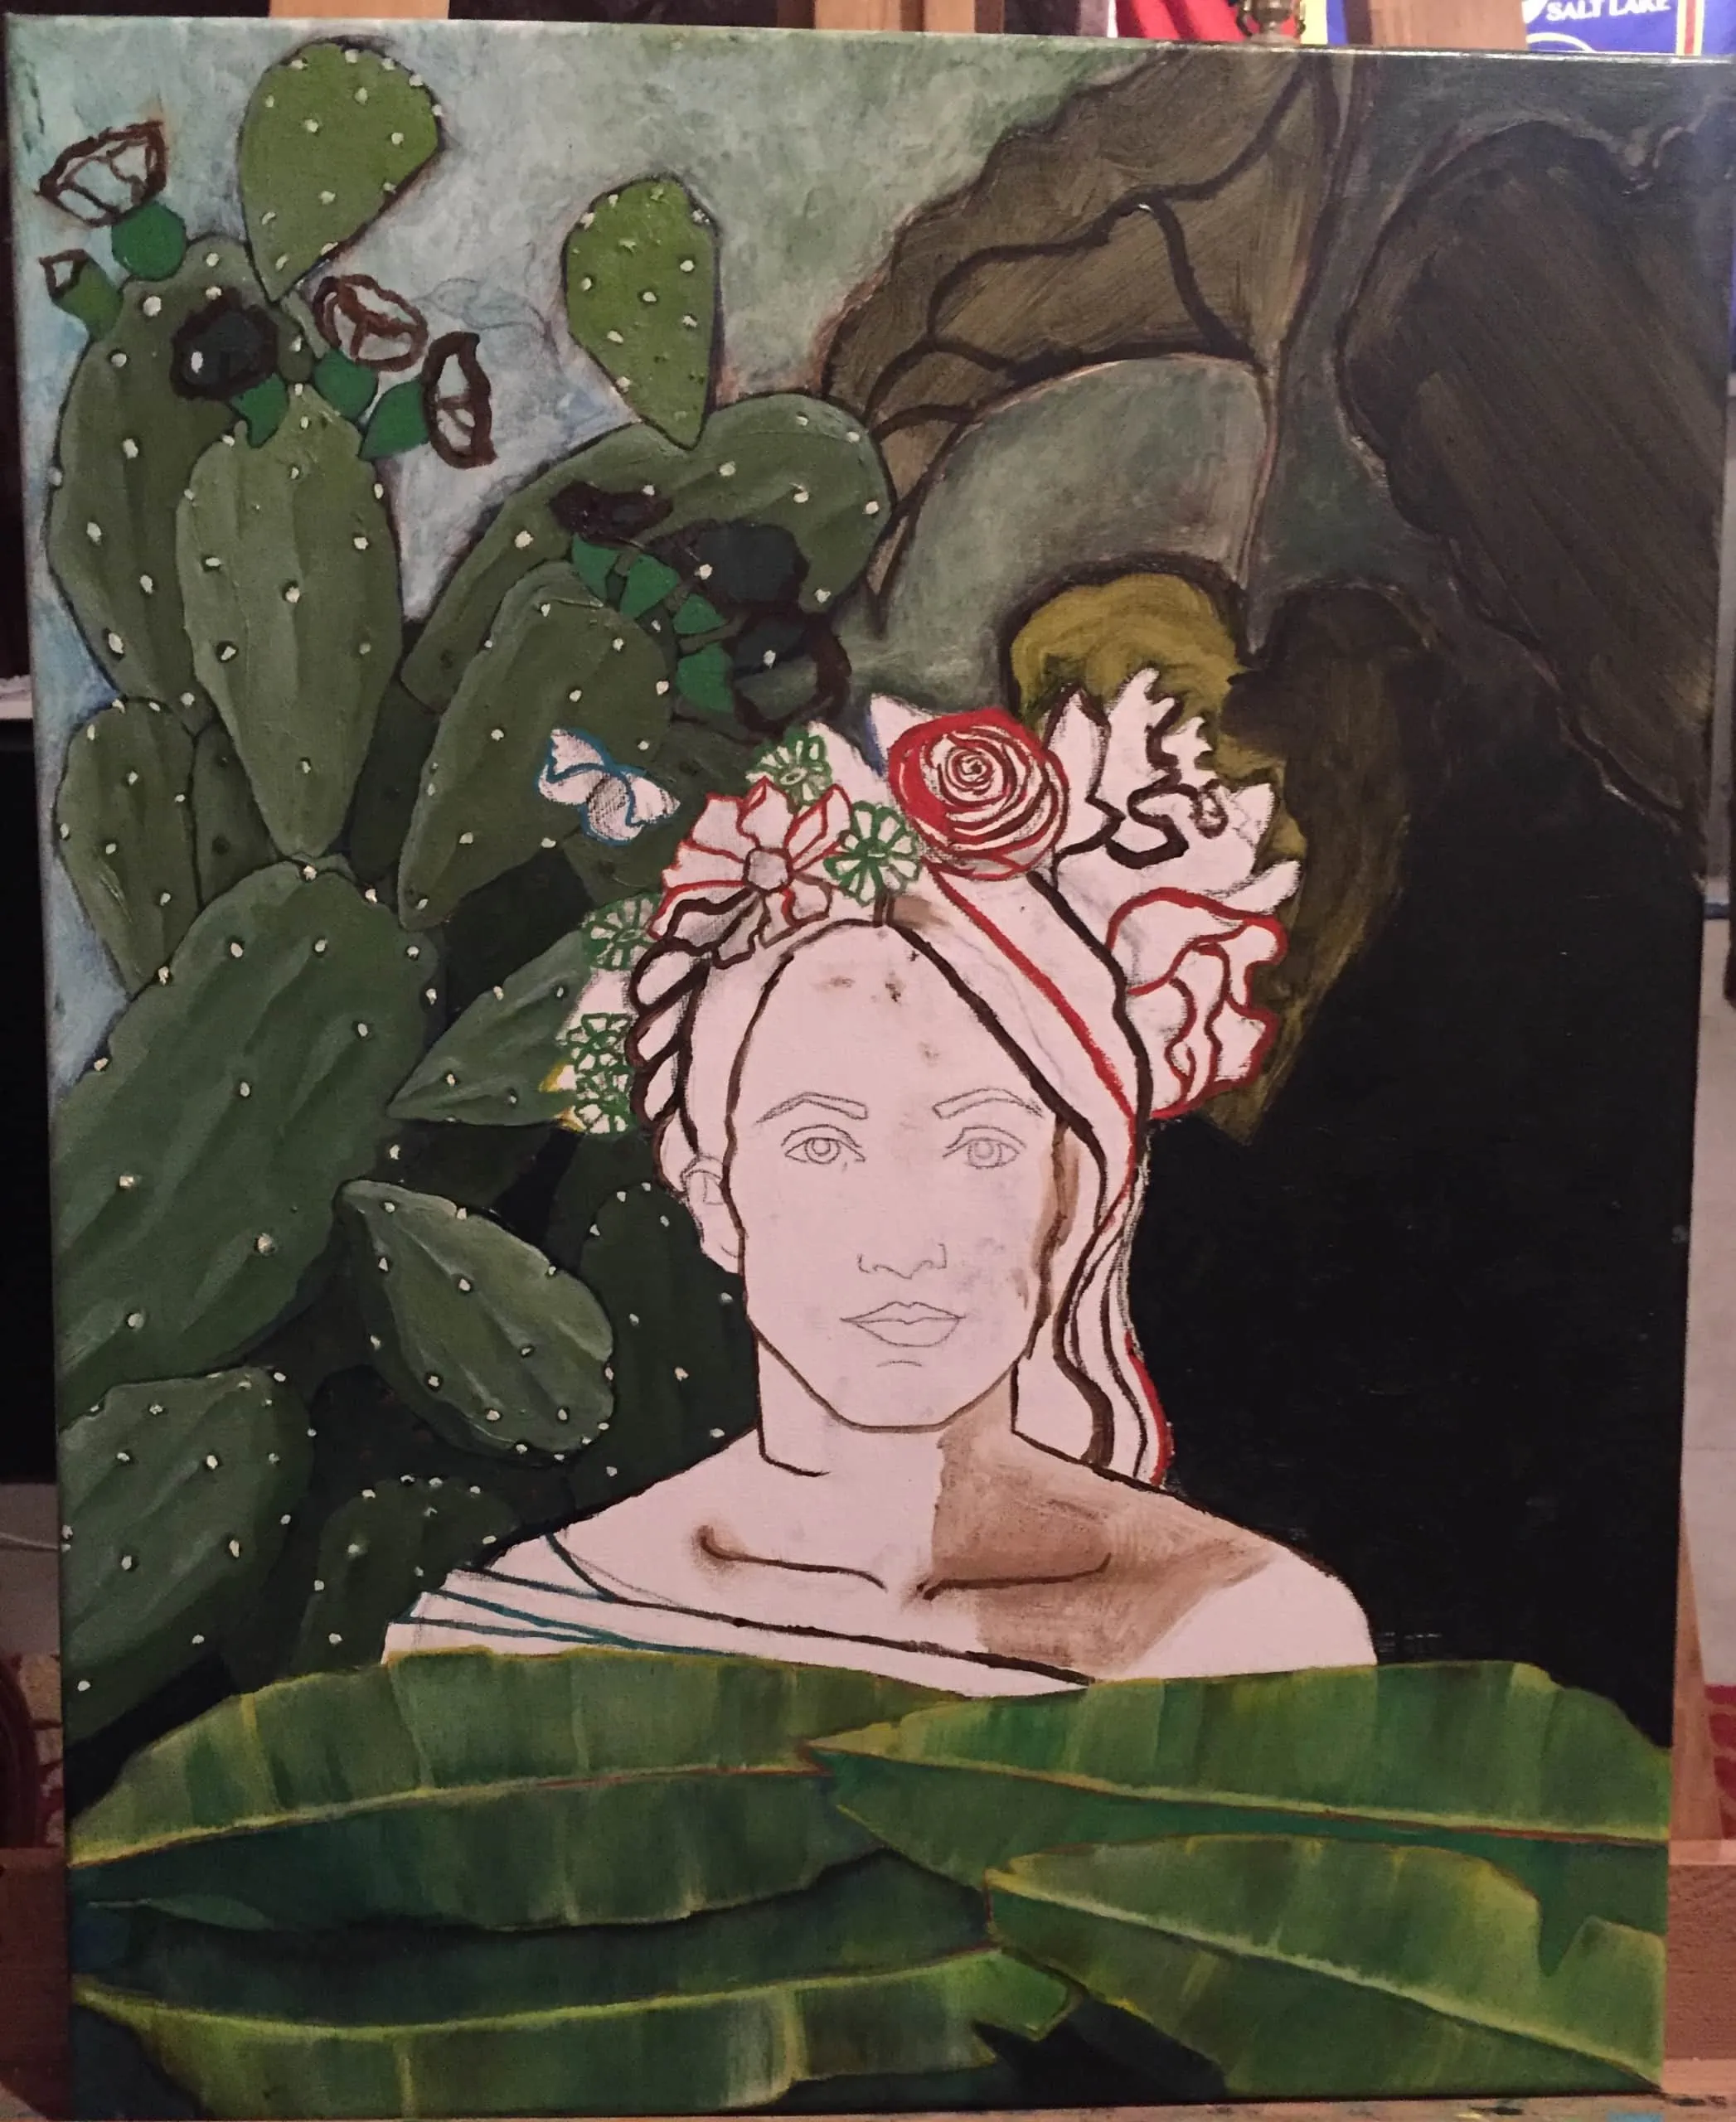 An unfinished painting of a woman against a plant background.